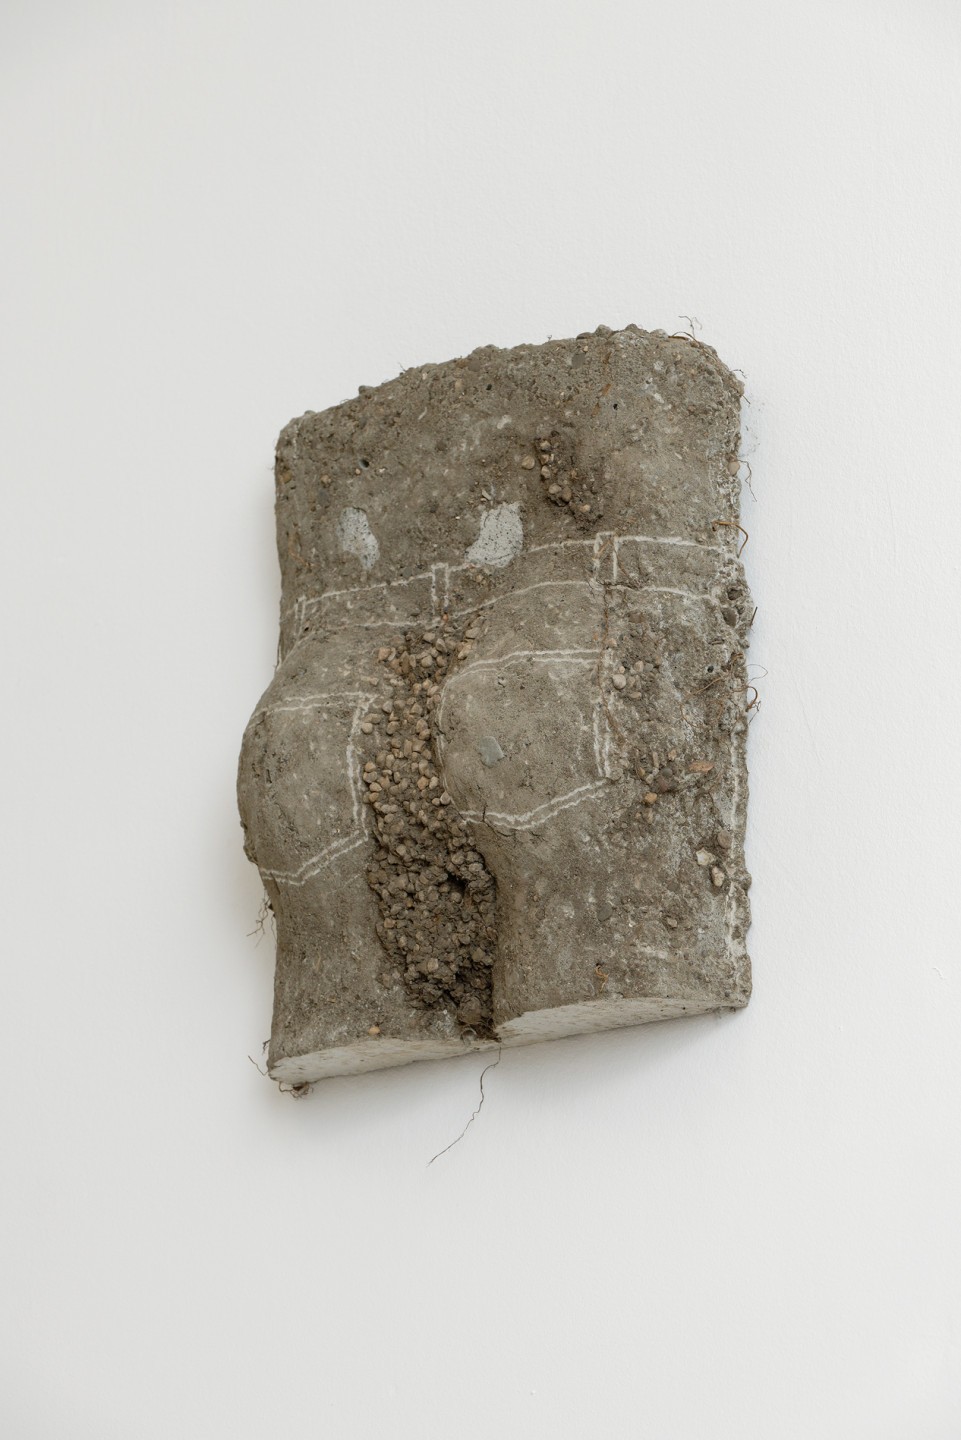 Jorge Satorre, I could never forget the way you told me everything by saying nothing (sculpture 3), 2021